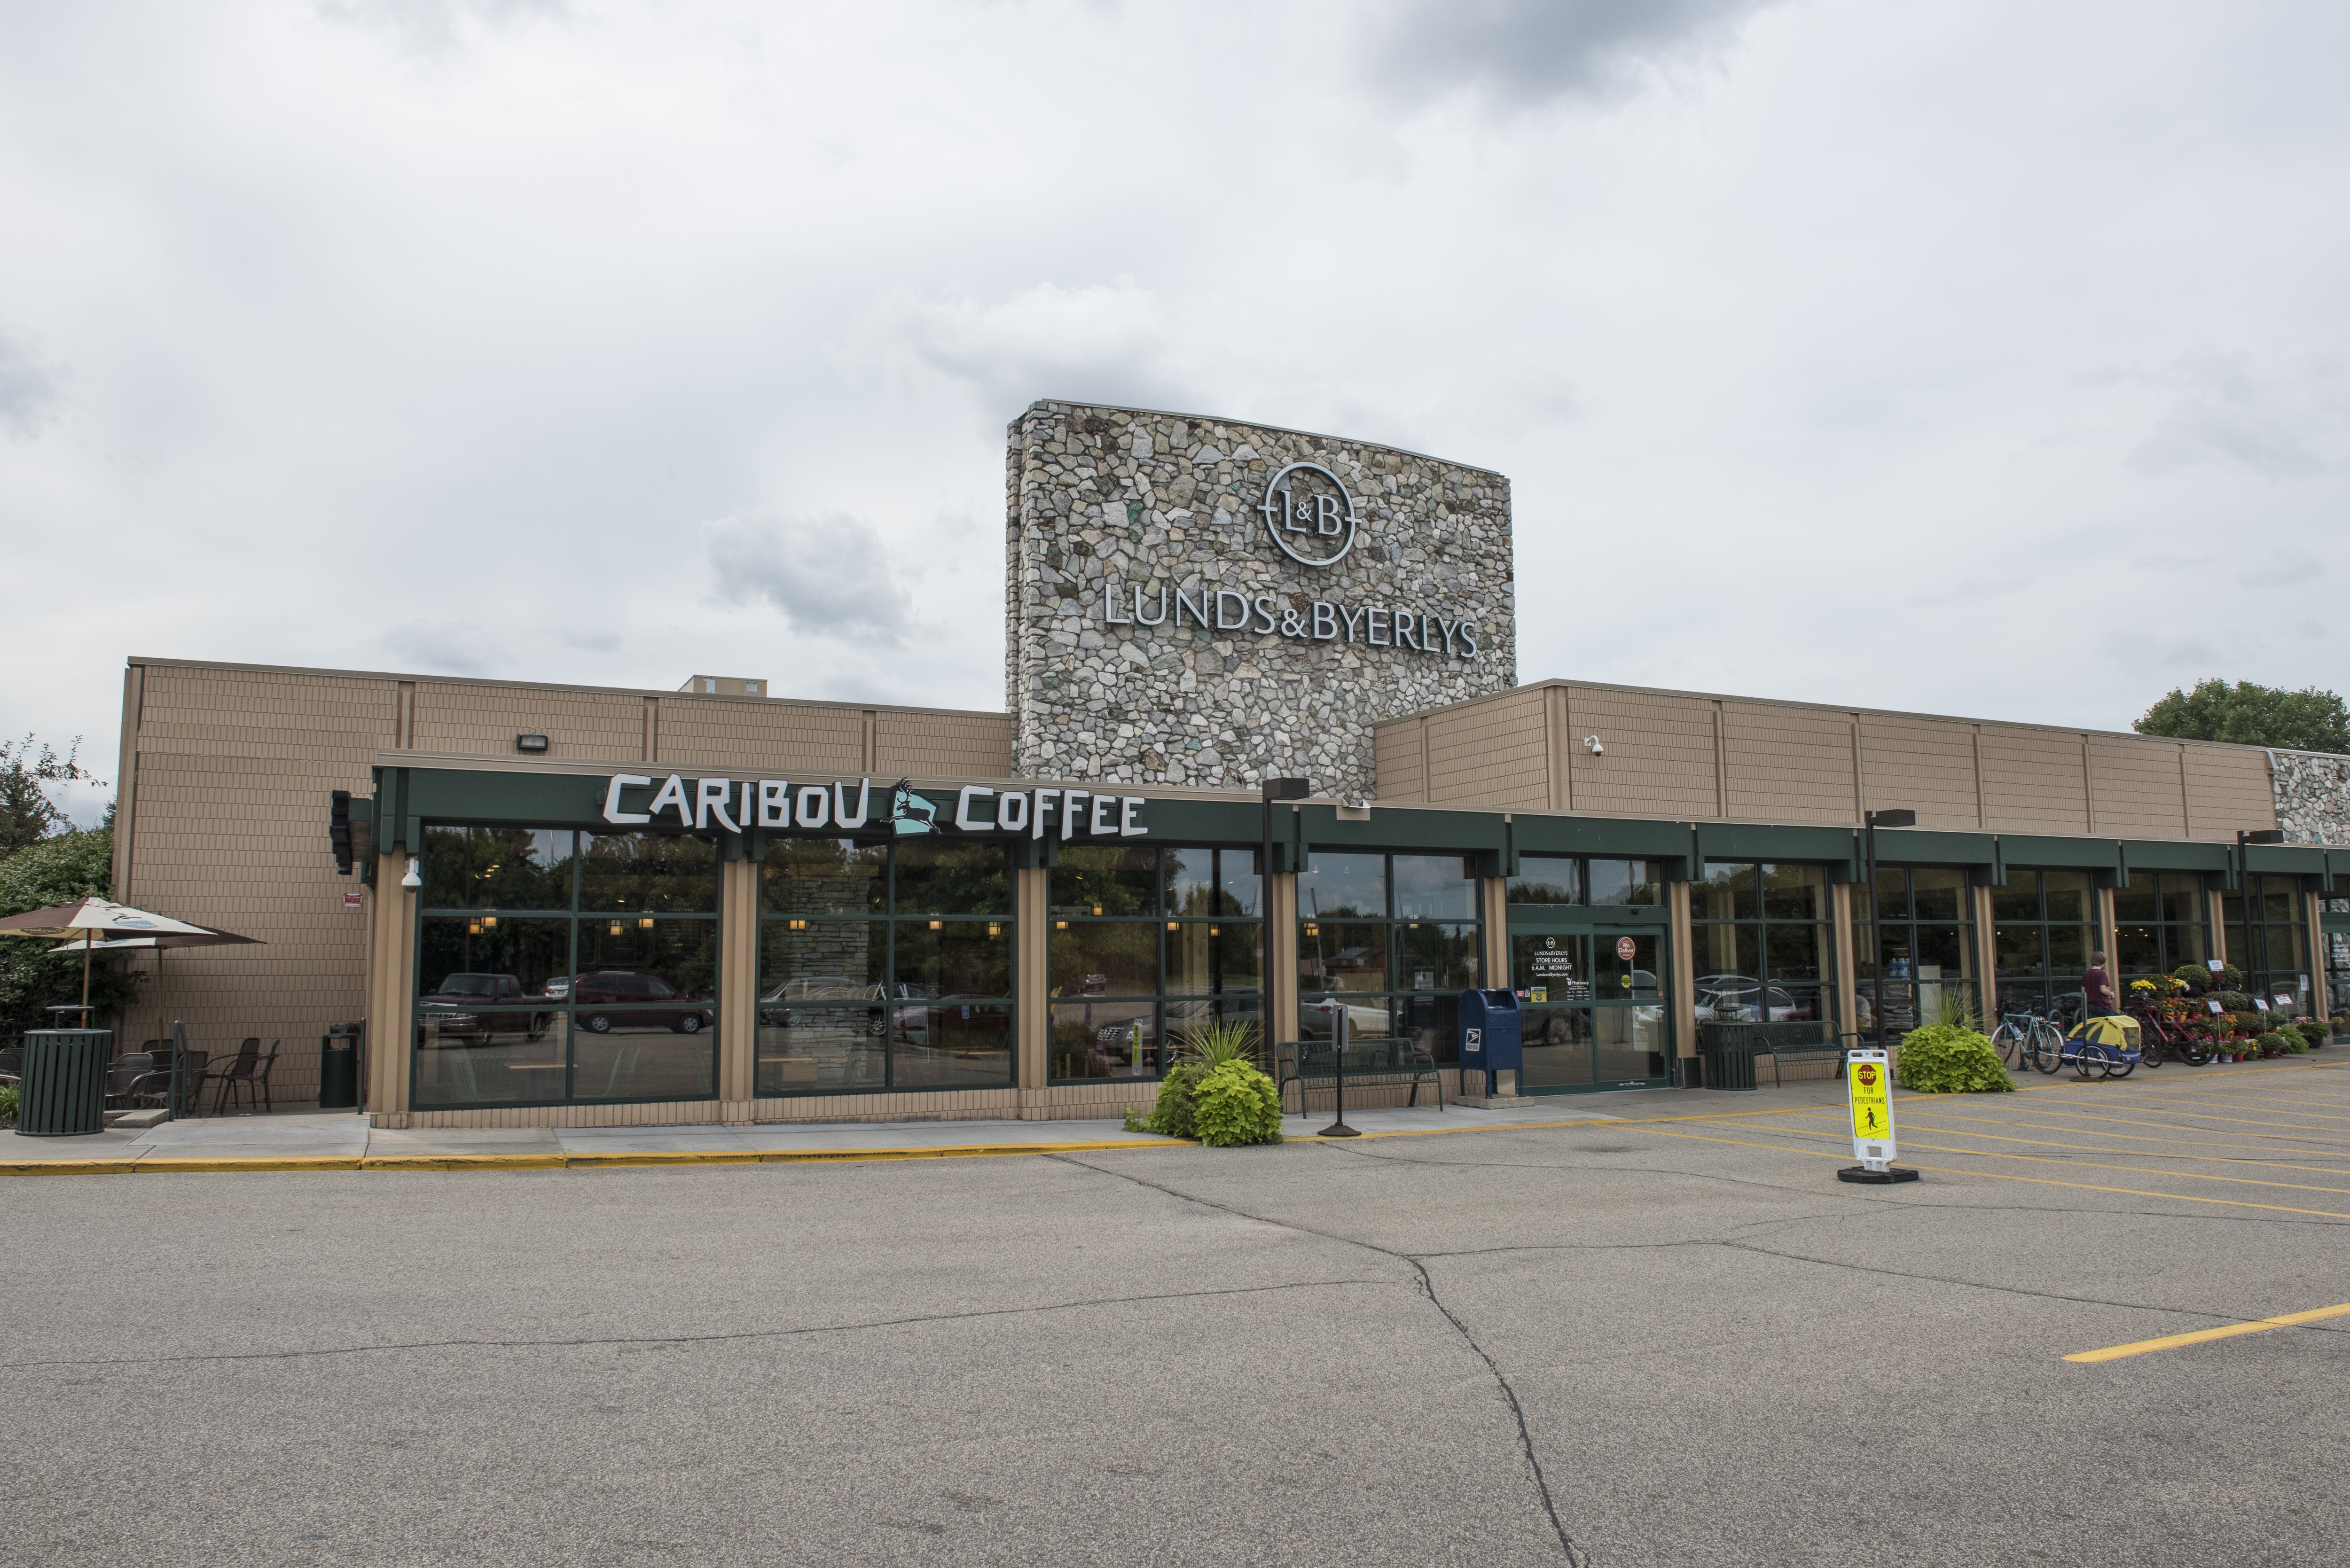 Exterior of store, there is a large stone sign on the roof and you can see the built in Caribou Coffee